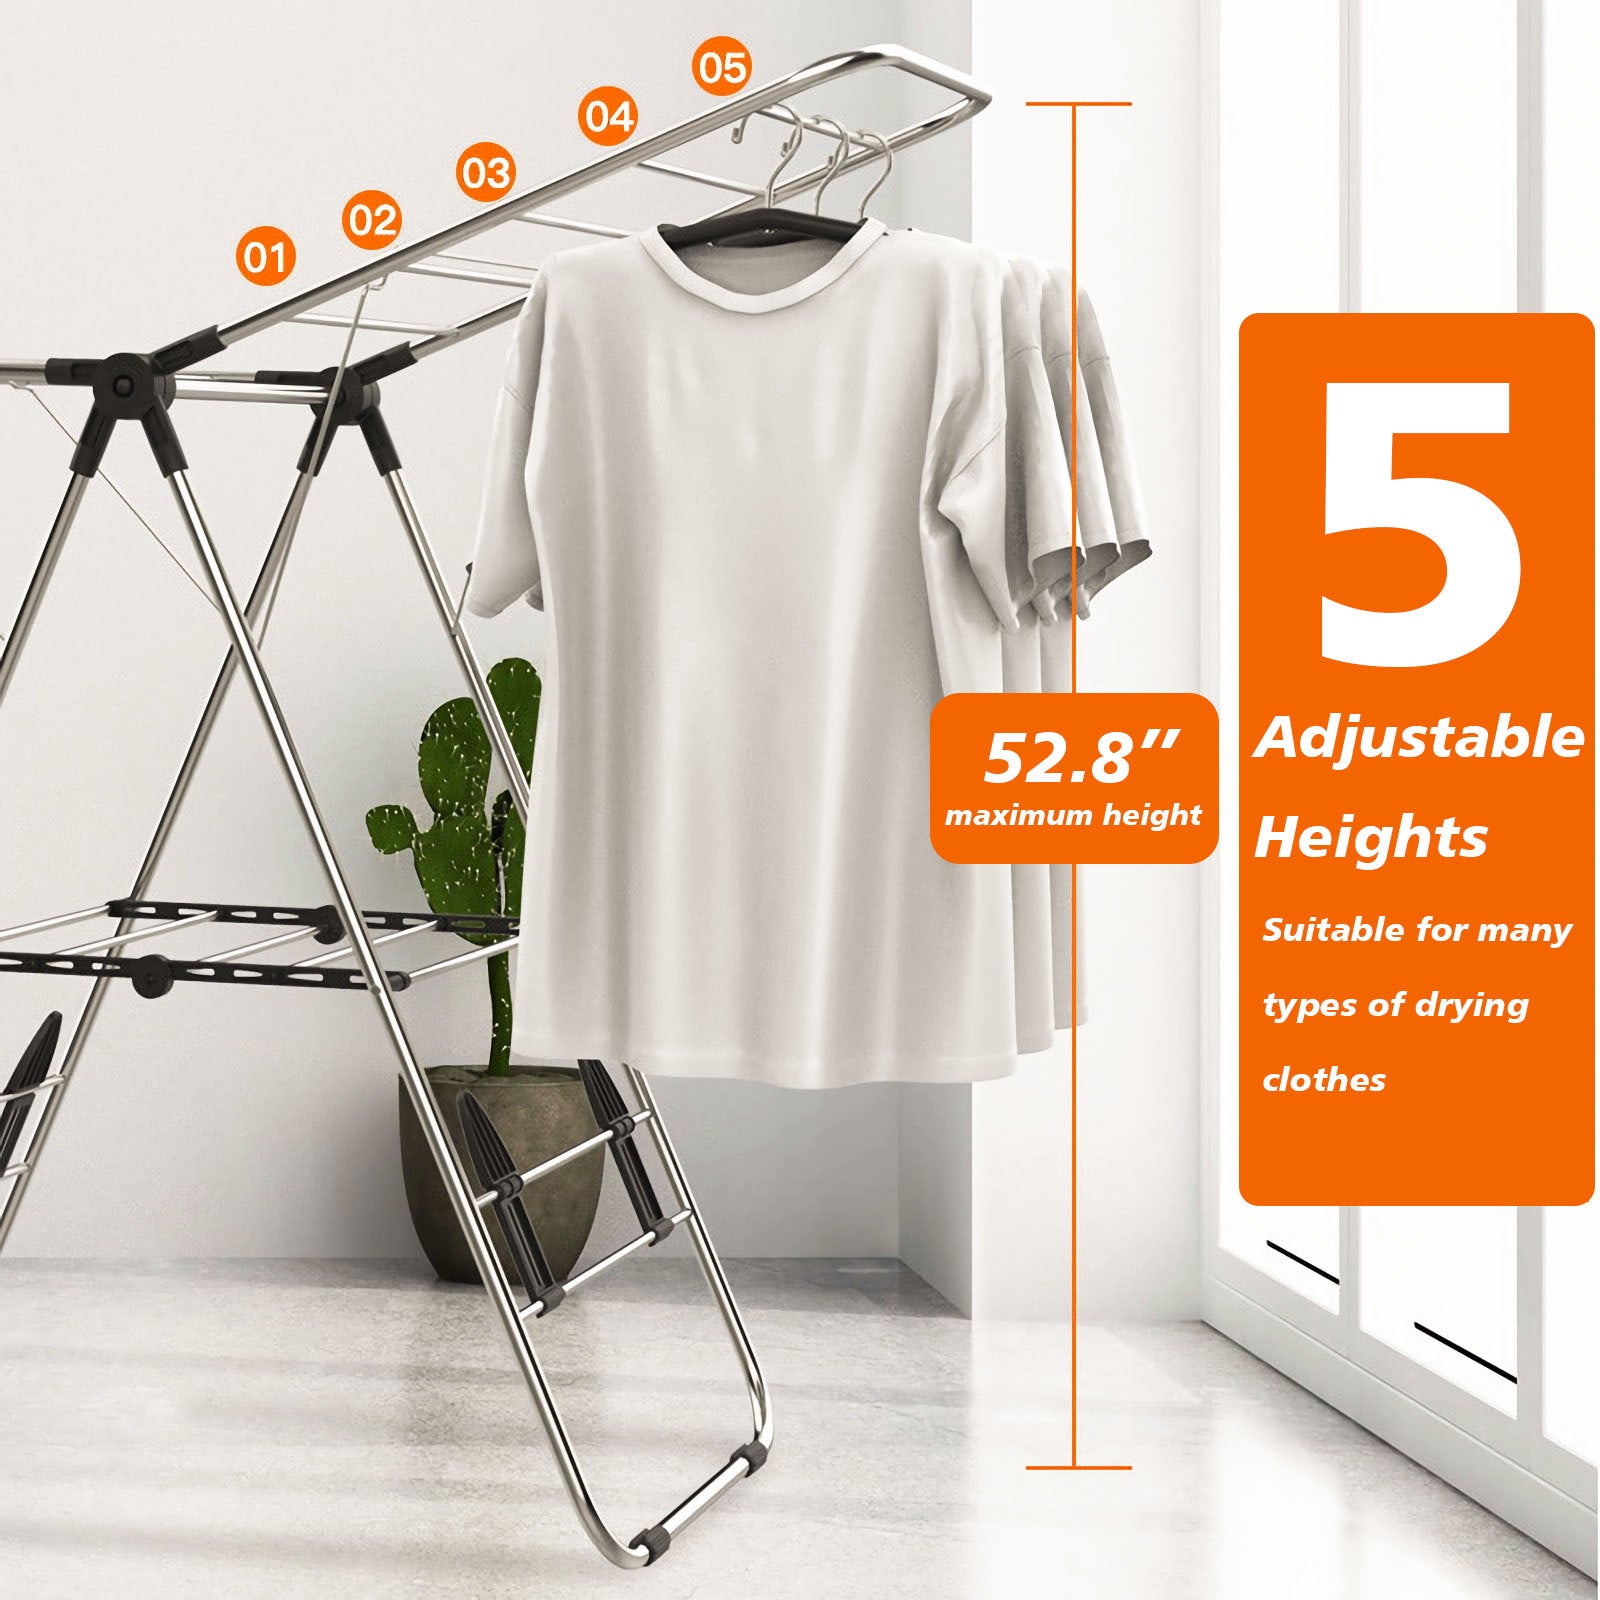 Clothes Drying Rack, Foldable 2-Layer Stainless Steel Laundry Drying Rack With Height Adjustable Gullwing, Laundry Rack For Drying Clothes, Towels, Shoes And Socks, Hats, Quilts